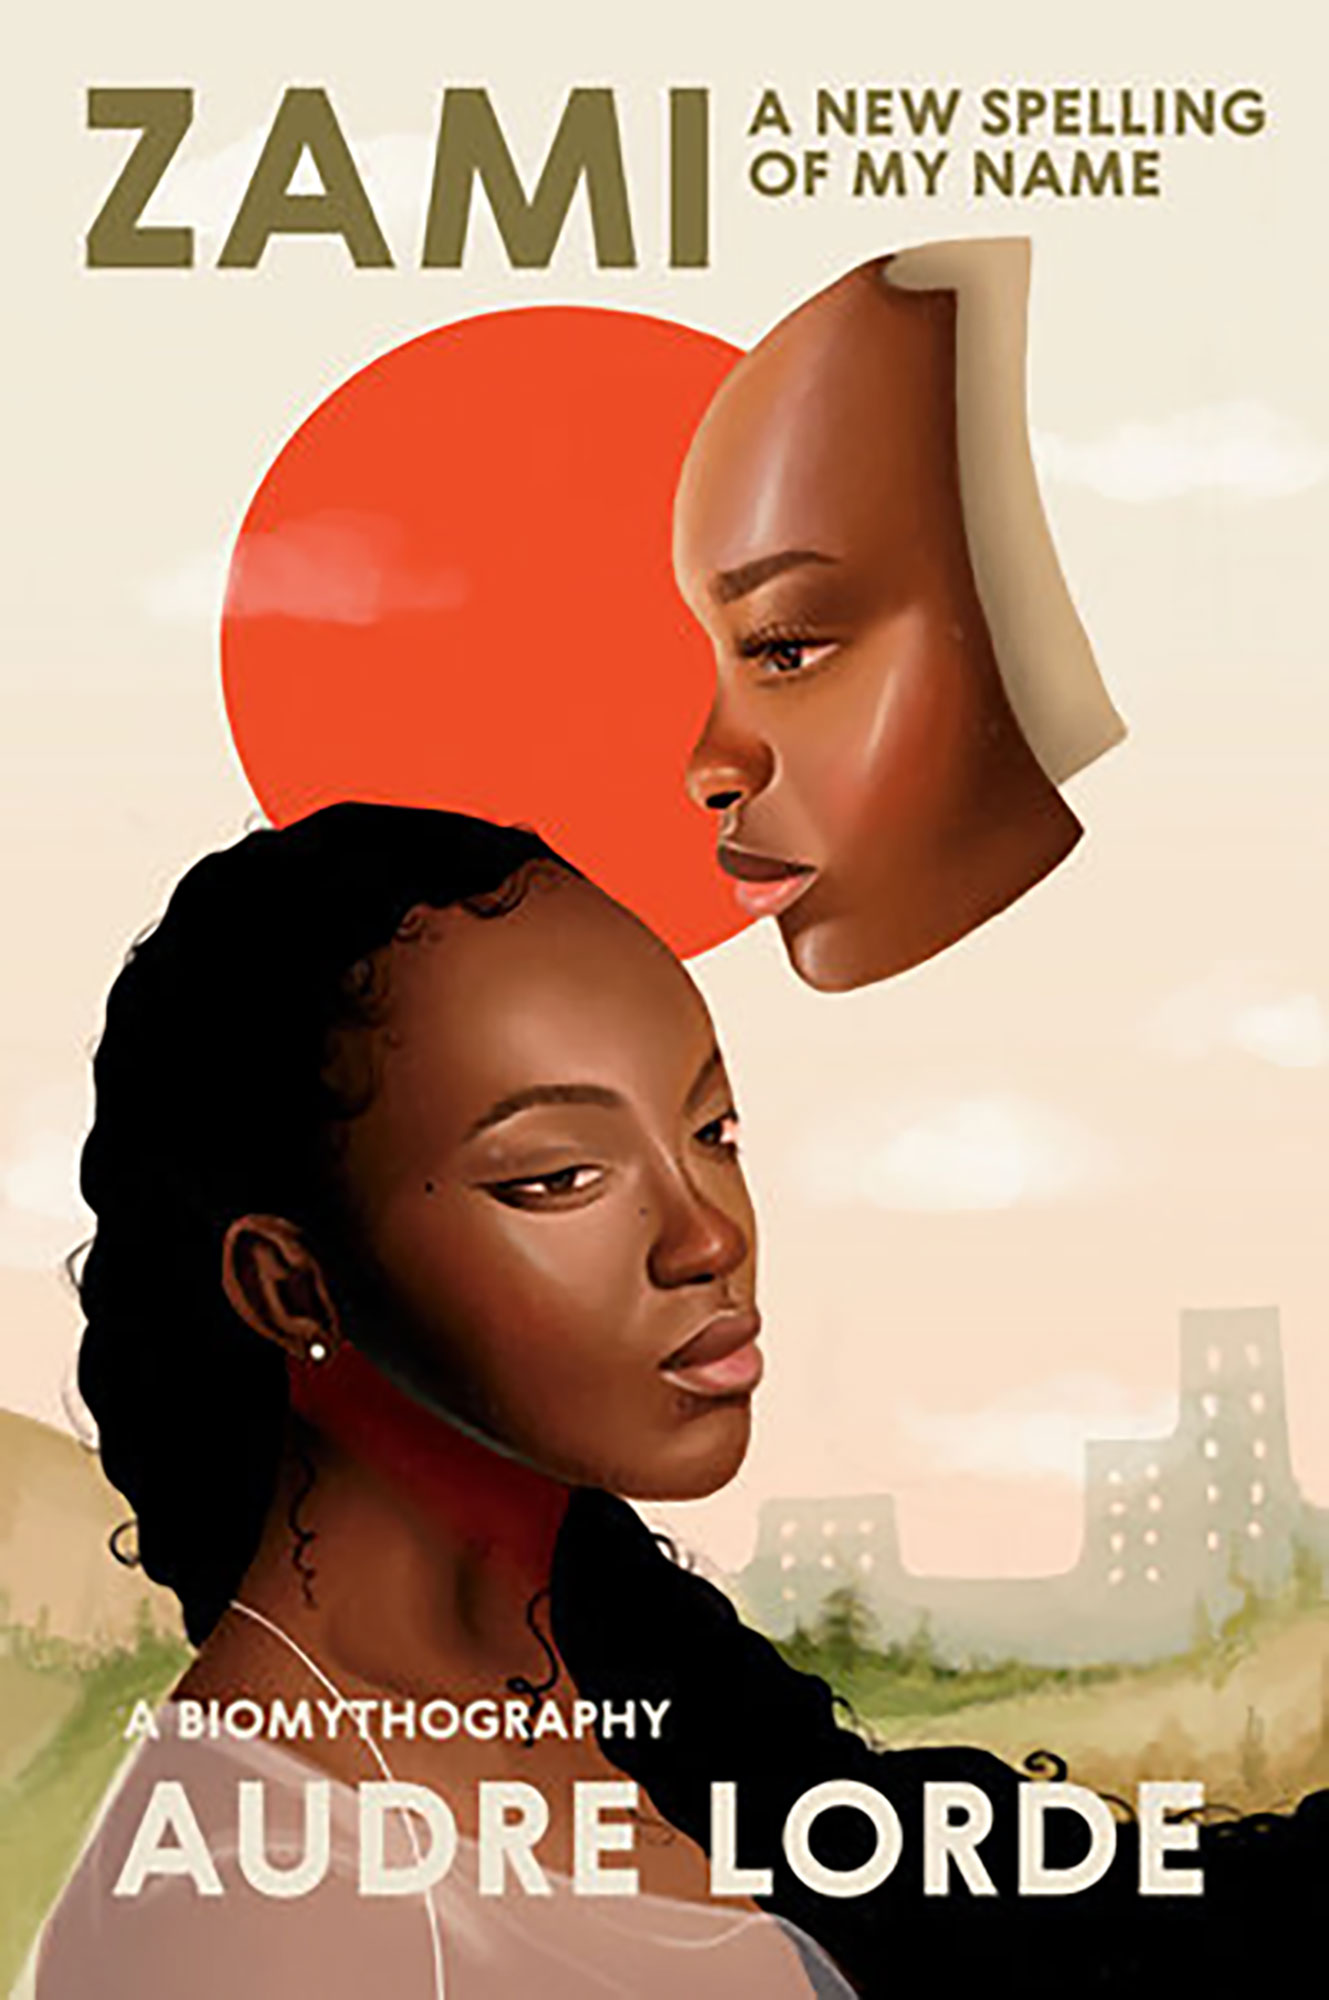 COVER: Tan background with a red sun and a cityscape in the background. There is a woman in the lower left corner looking to the right and a face floating on her right side looking to the left. The title, "Zami: A New Spelling of My Name" is at the top of the cover and the text "A Biomythography" and the author's name are at the bottom. Book cover courtesy of Penguin Random House. SOURCE: https://www.penguinrandomhouse.com/books/198090/zami-a-new-spelling-of-my-name-by-audre-geraldine-lorde/